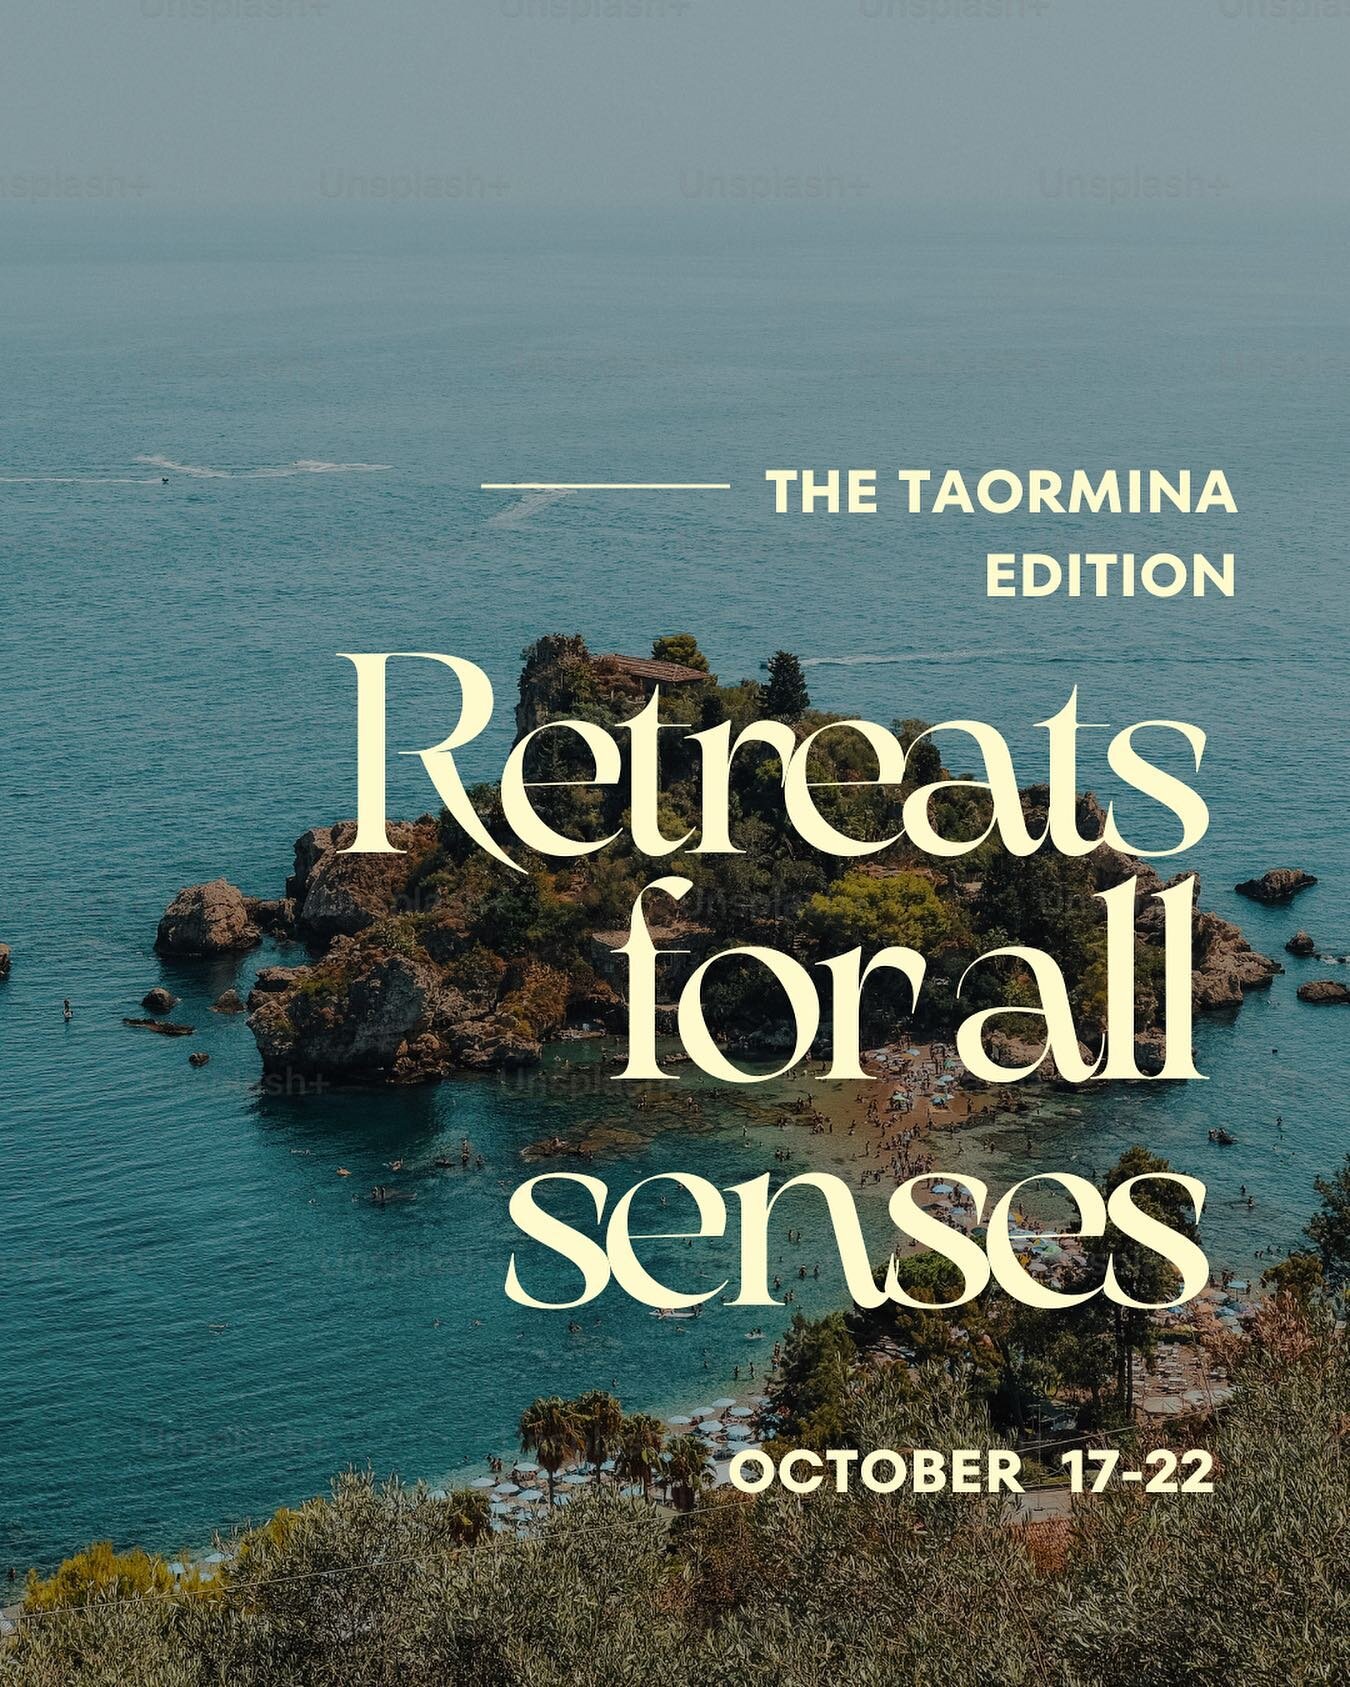 We are open for bookings! Welcome to join us in October for our female wellness and lifestyle retreat - for all senses.

Together we will discover the exquisite Sicilian food culture, explore historical gems and take care of our bodies and minds thro